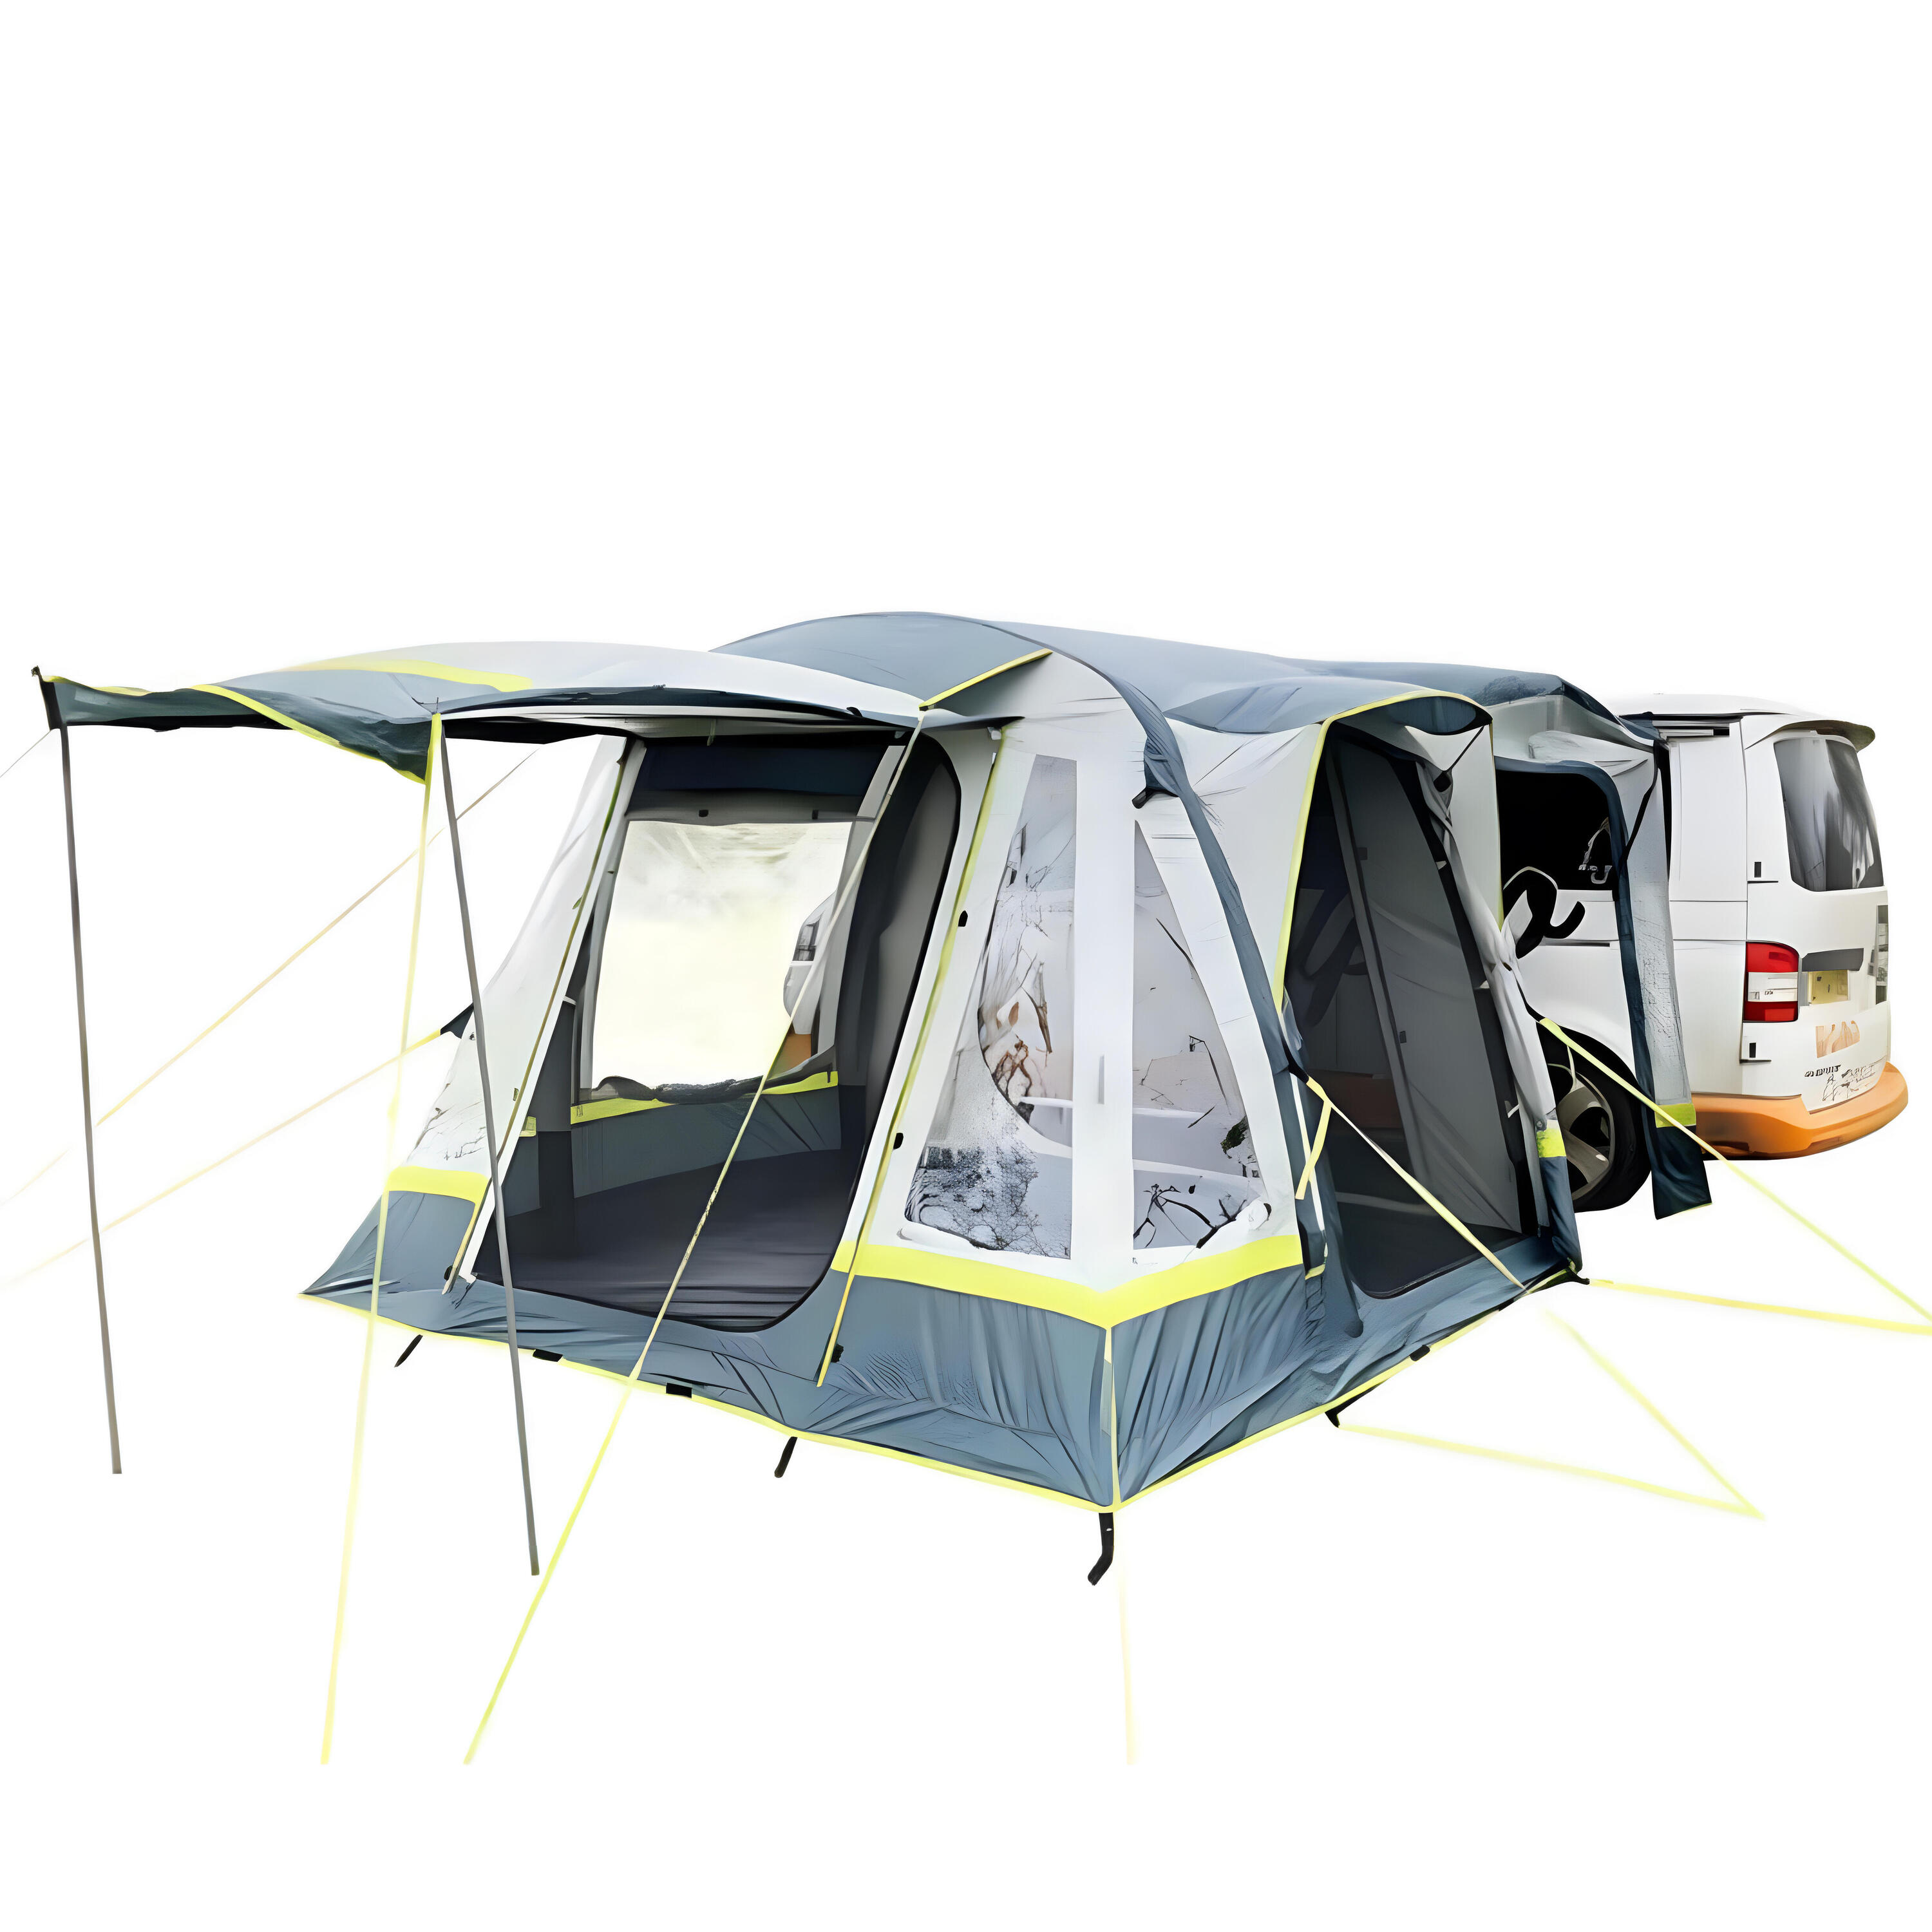 OLPRO OLPRO Loopo Breeze - Inflatable Campervan Awning - Limited Edition